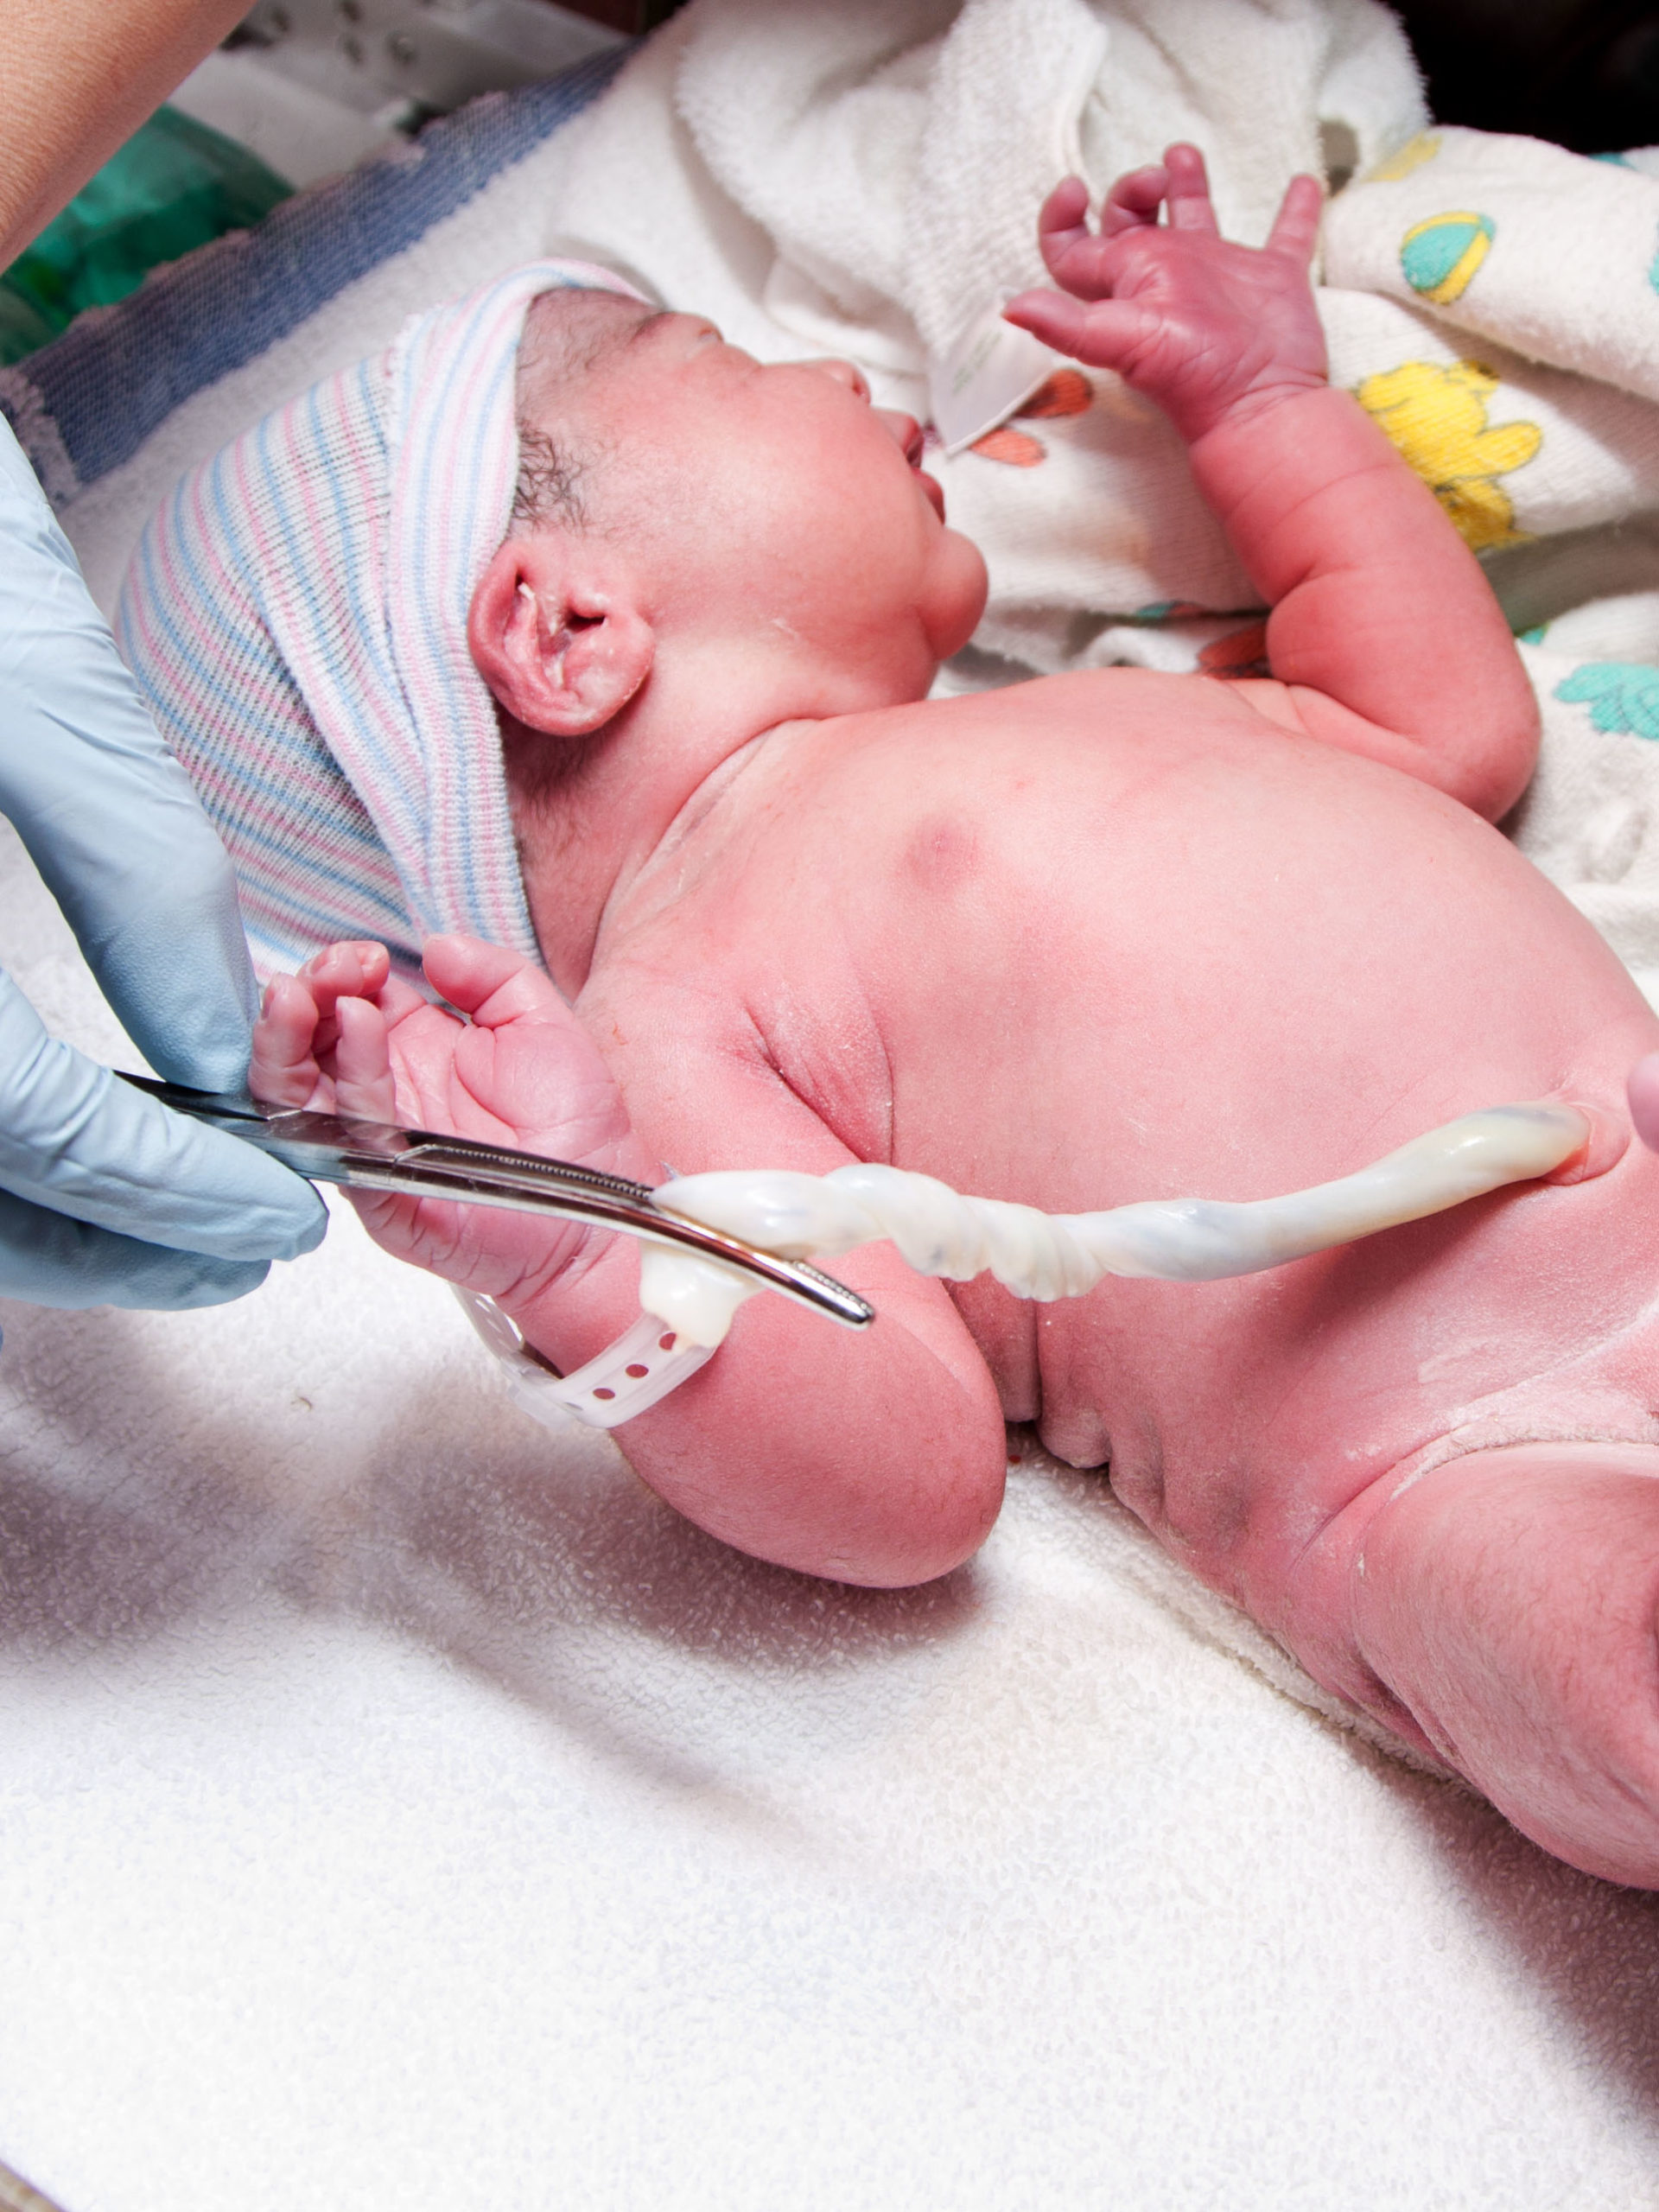 infant with adult hand holding clip on umbilical cord in hospital nursery